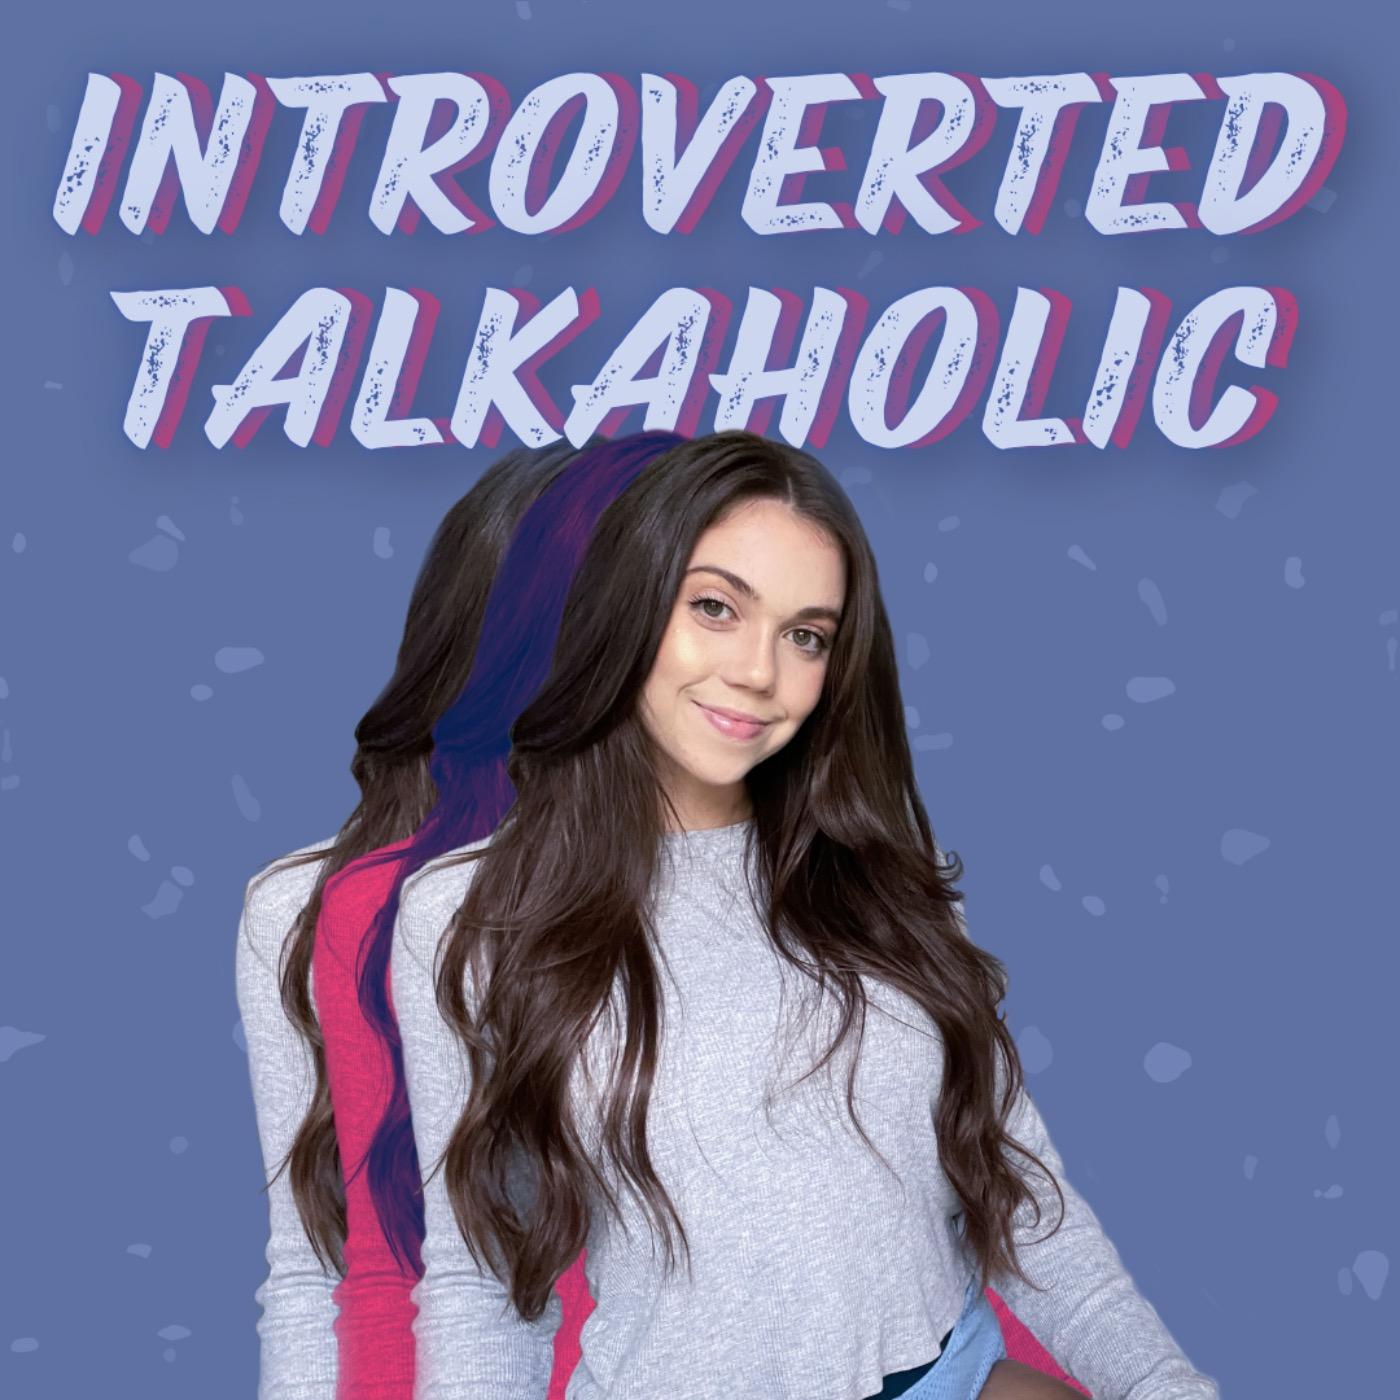 Introverted Talkaholic